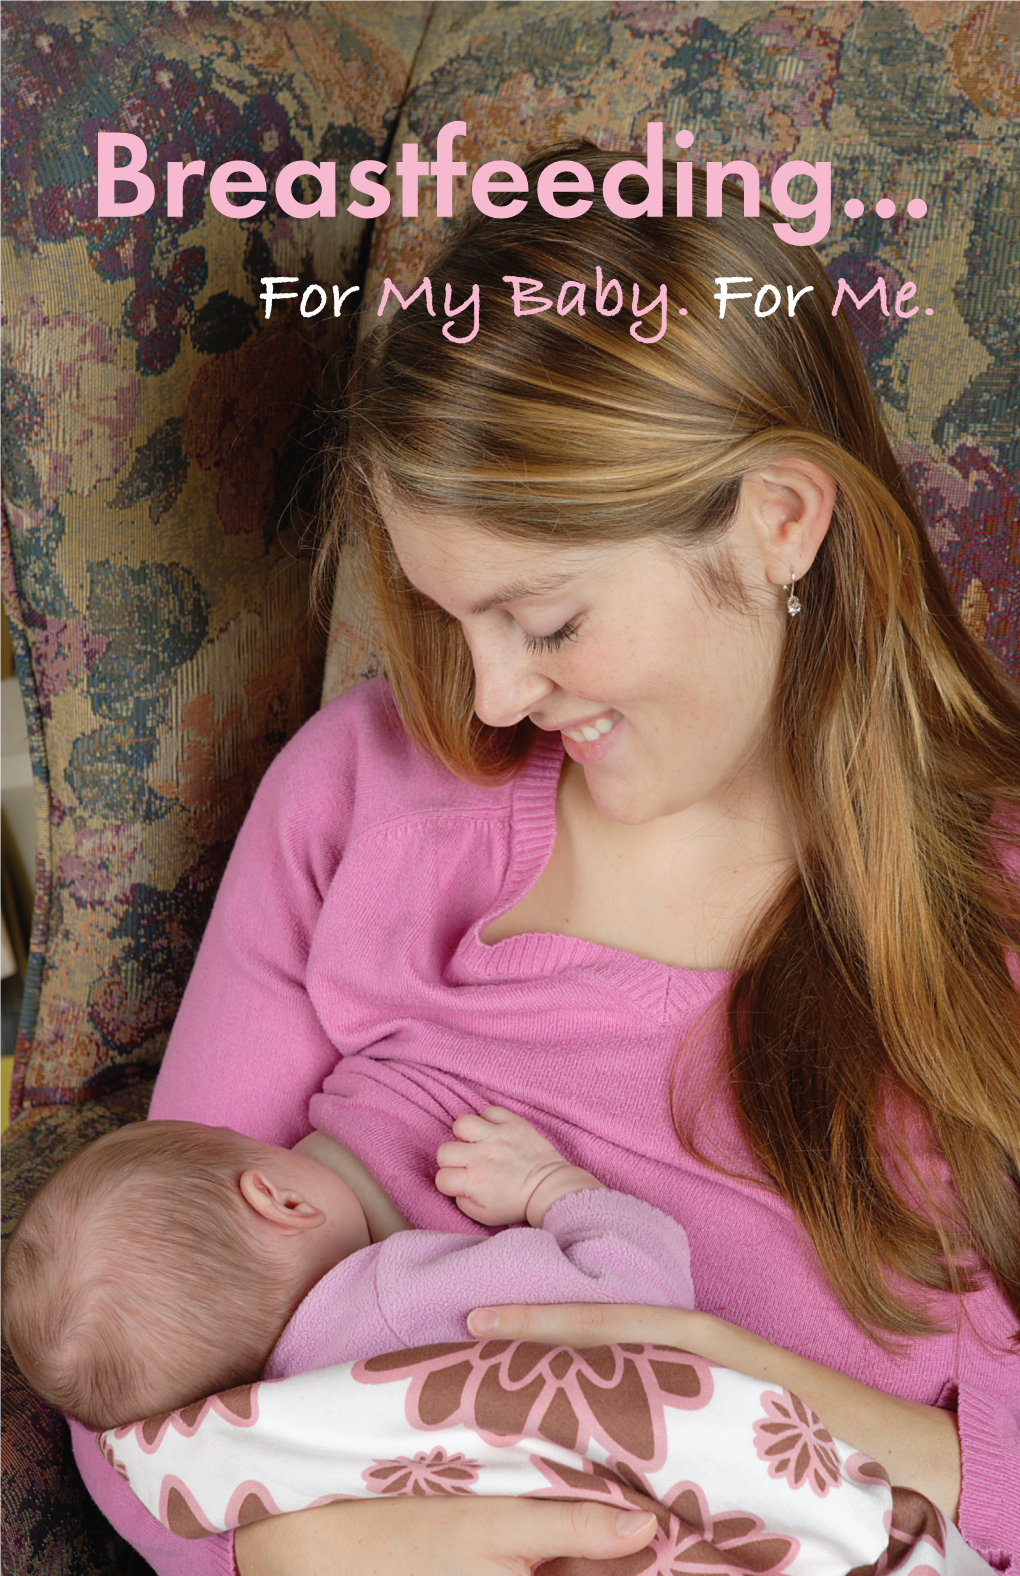 Breastfeeding… for My Baby. For